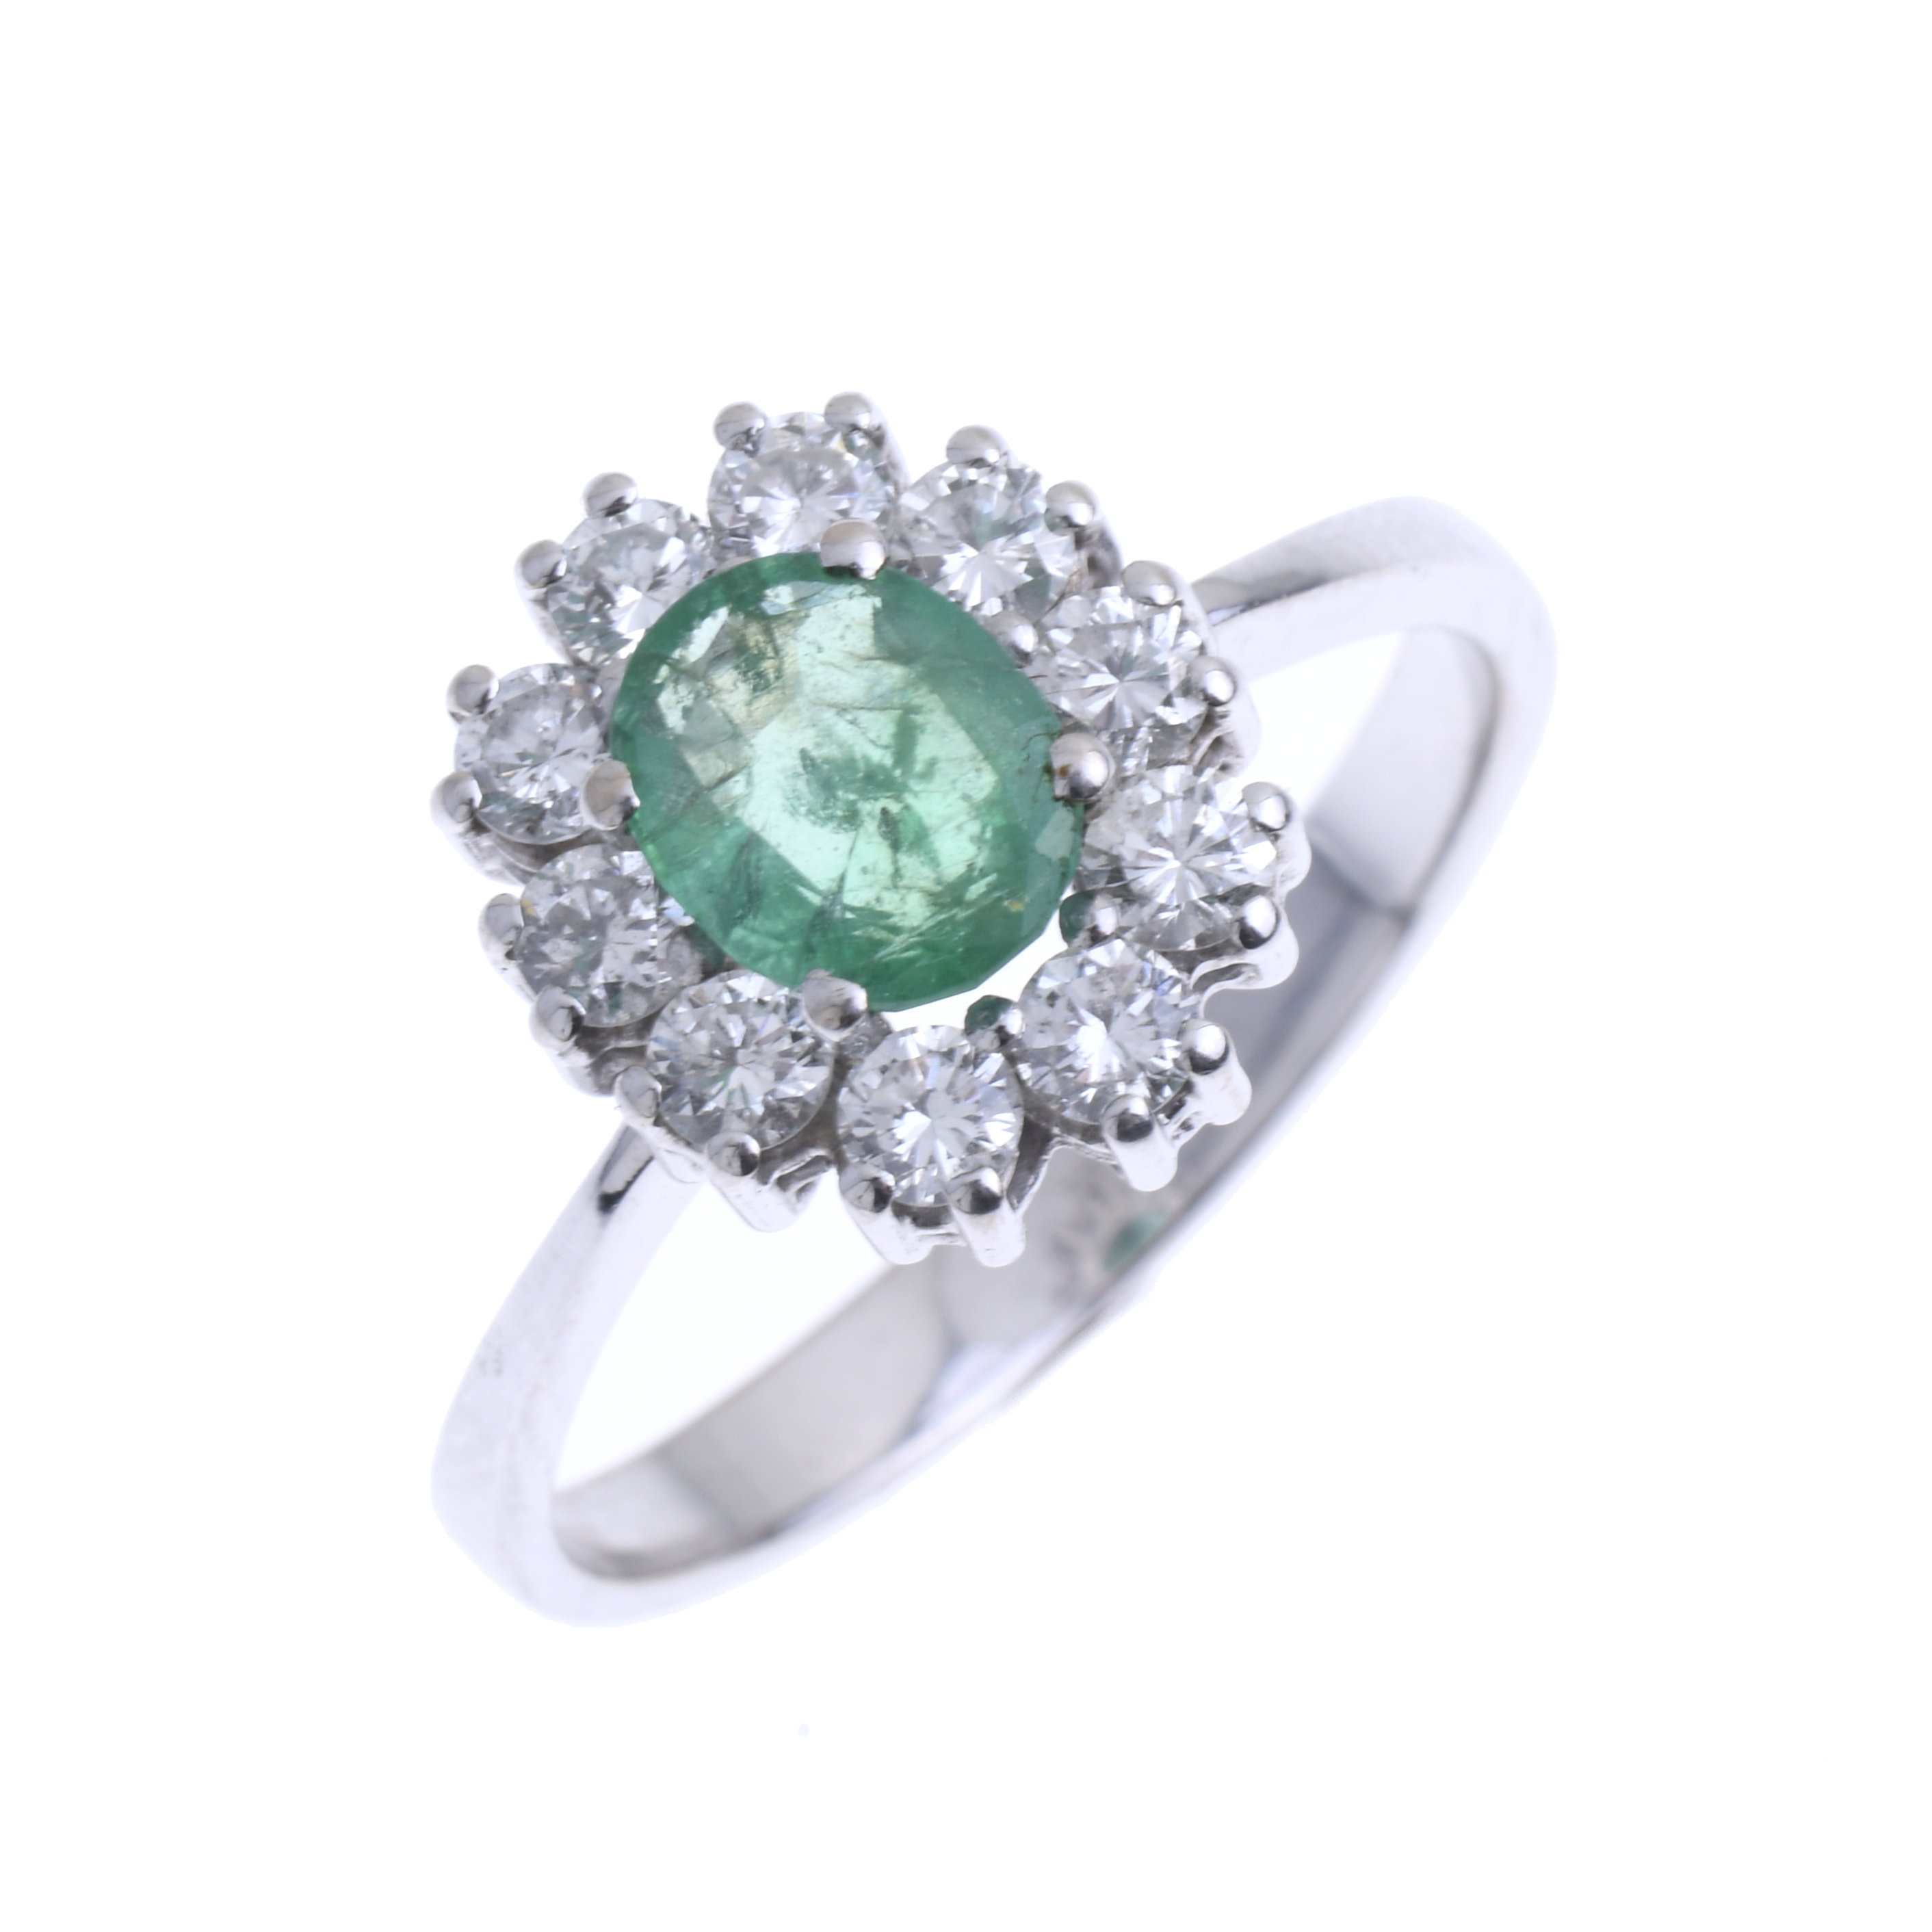 RING WITH DIAMONDS AND CENTRAL EMERALD.